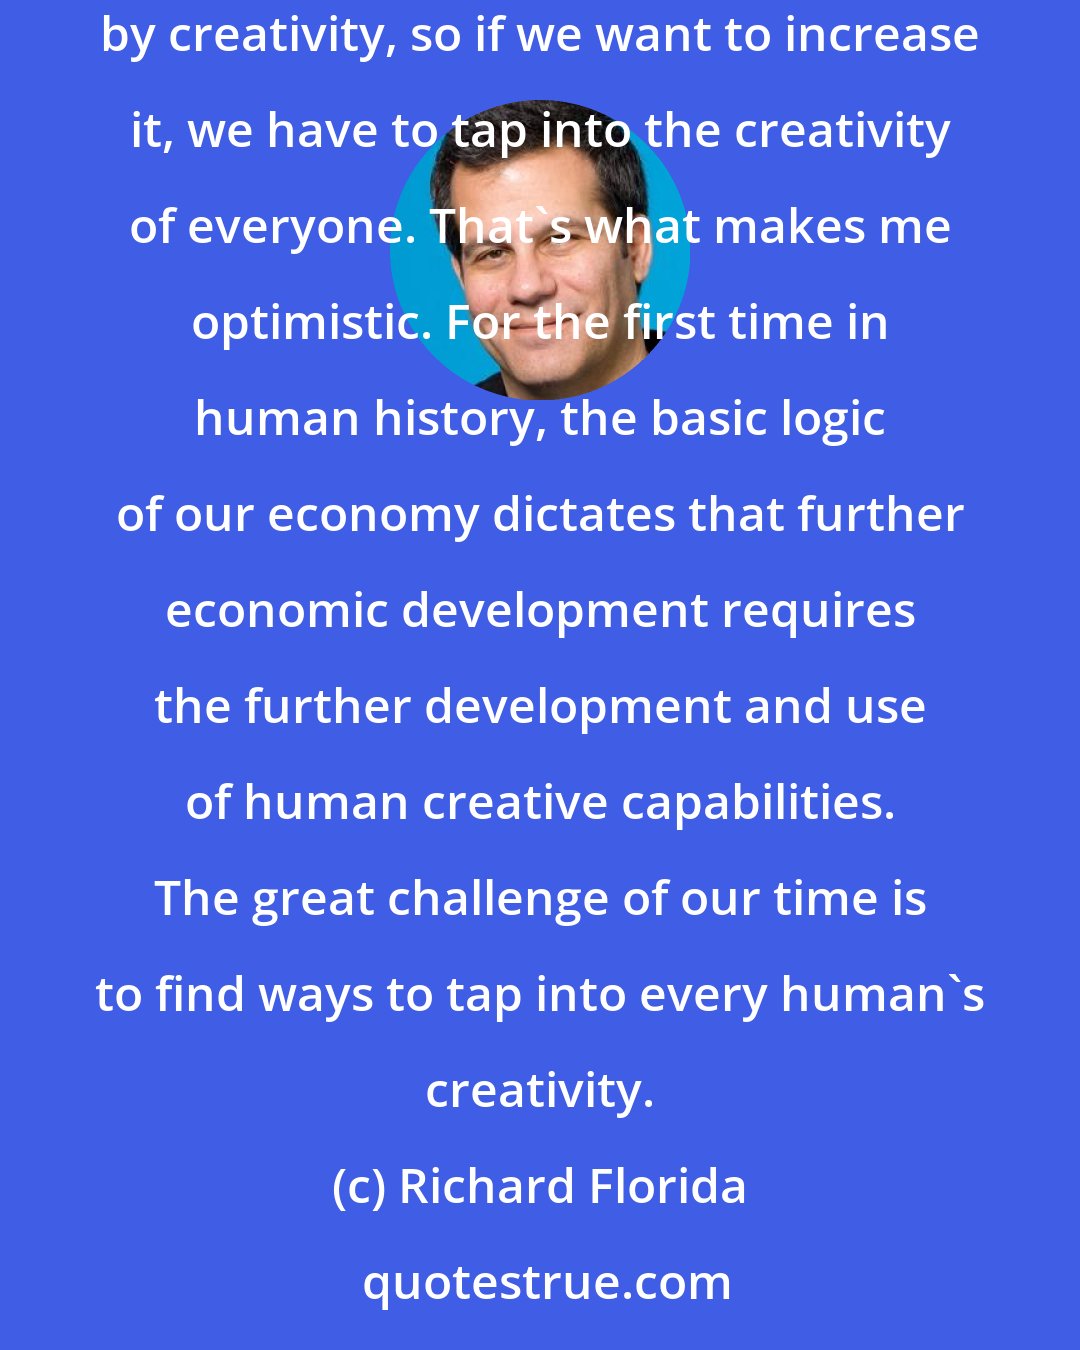 Richard Florida: Every single human being is creative and maximizing that creativity is critical to happiness and economic growth. Economic growth is driven by creativity, so if we want to increase it, we have to tap into the creativity of everyone. That's what makes me optimistic. For the first time in human history, the basic logic of our economy dictates that further economic development requires the further development and use of human creative capabilities. The great challenge of our time is to find ways to tap into every human's creativity.